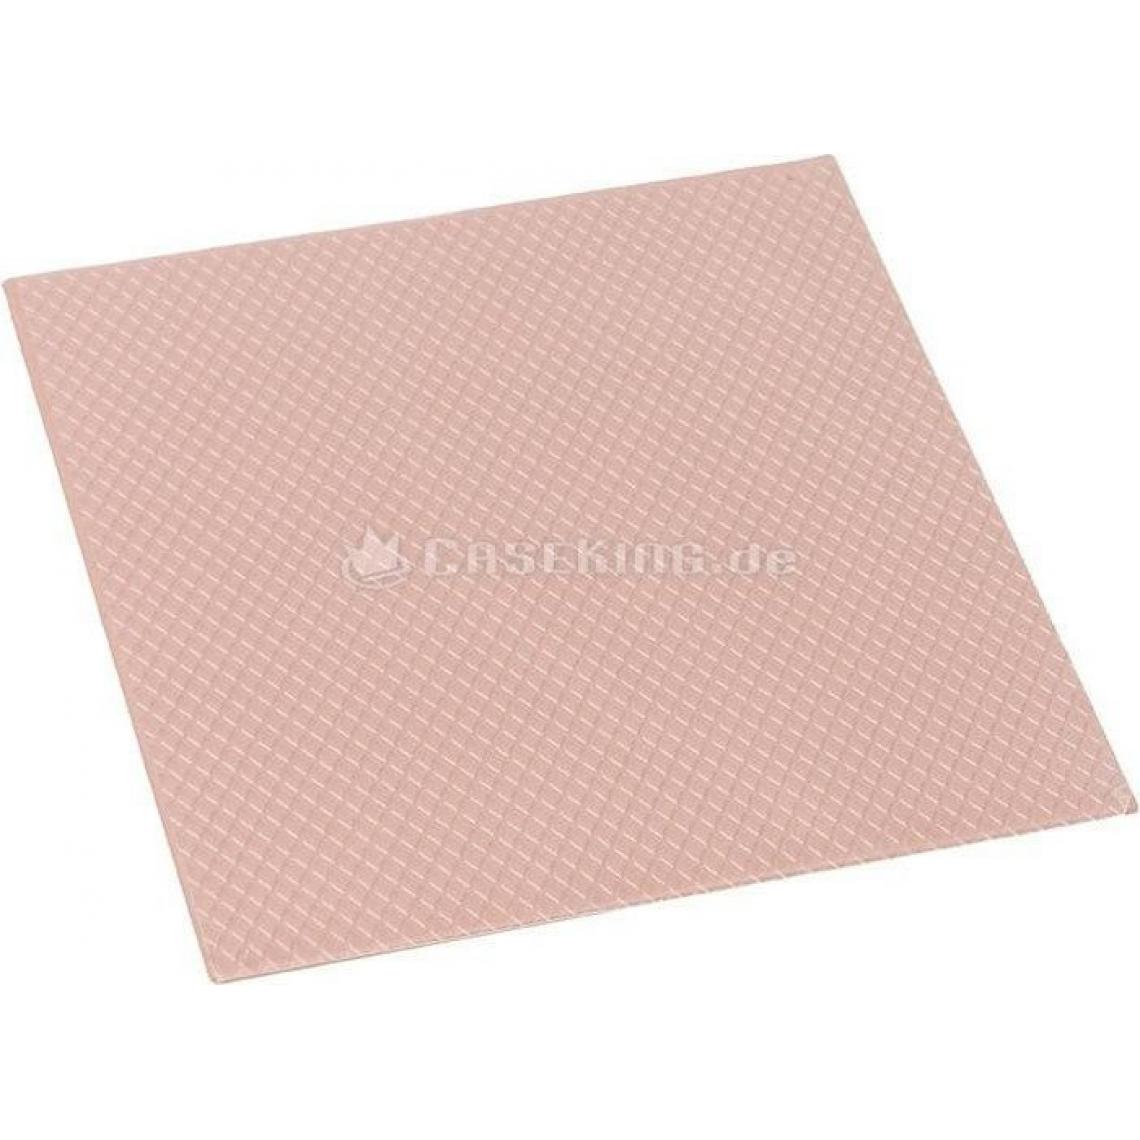 Thermal Grizzly - Minus 8 - 100 × 100 × 1,5 mm - Ventirad carte graphique